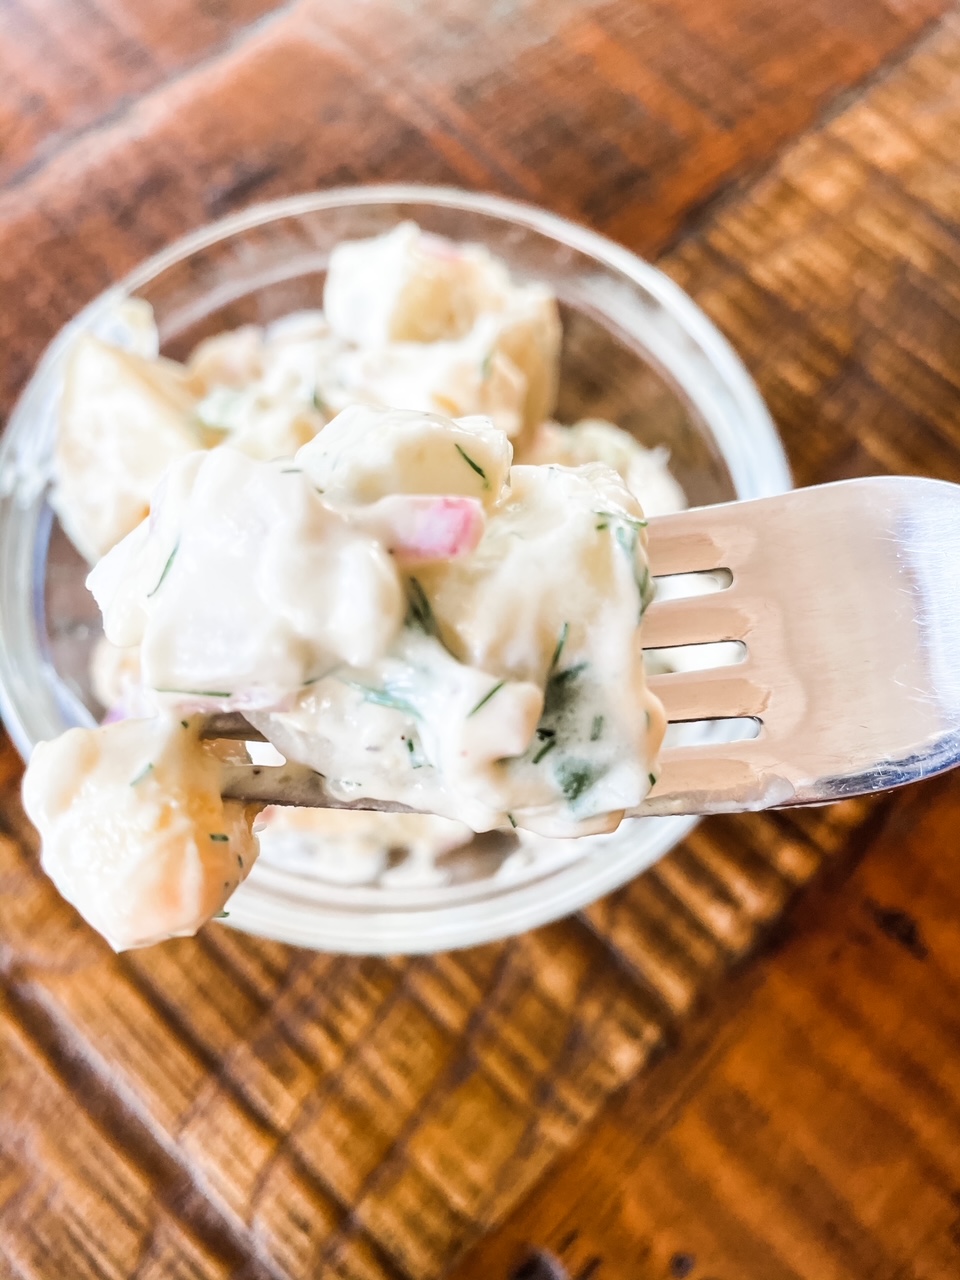 A bowl of the Potato Salad with Dill with a forking digging into it.